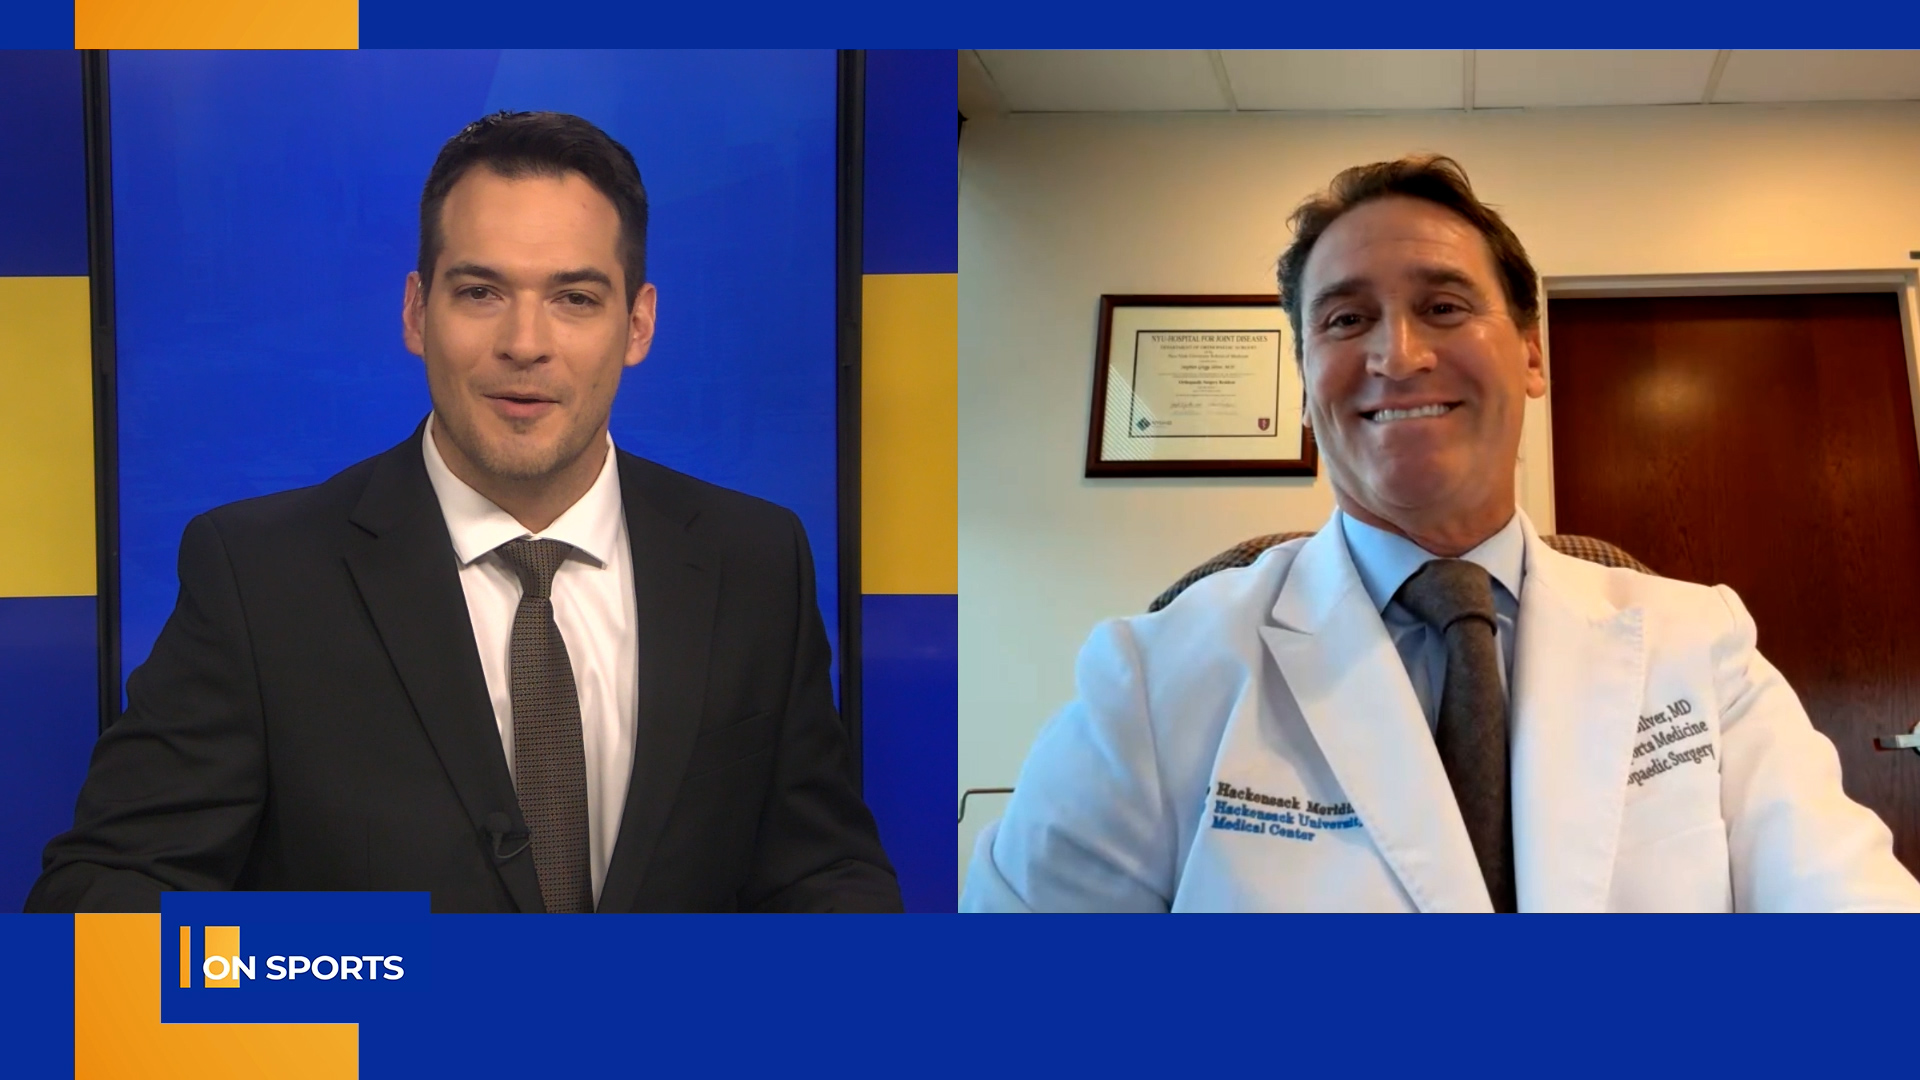 On Sports – Dr. Silver Comments on the Return of Aaron Rodgers